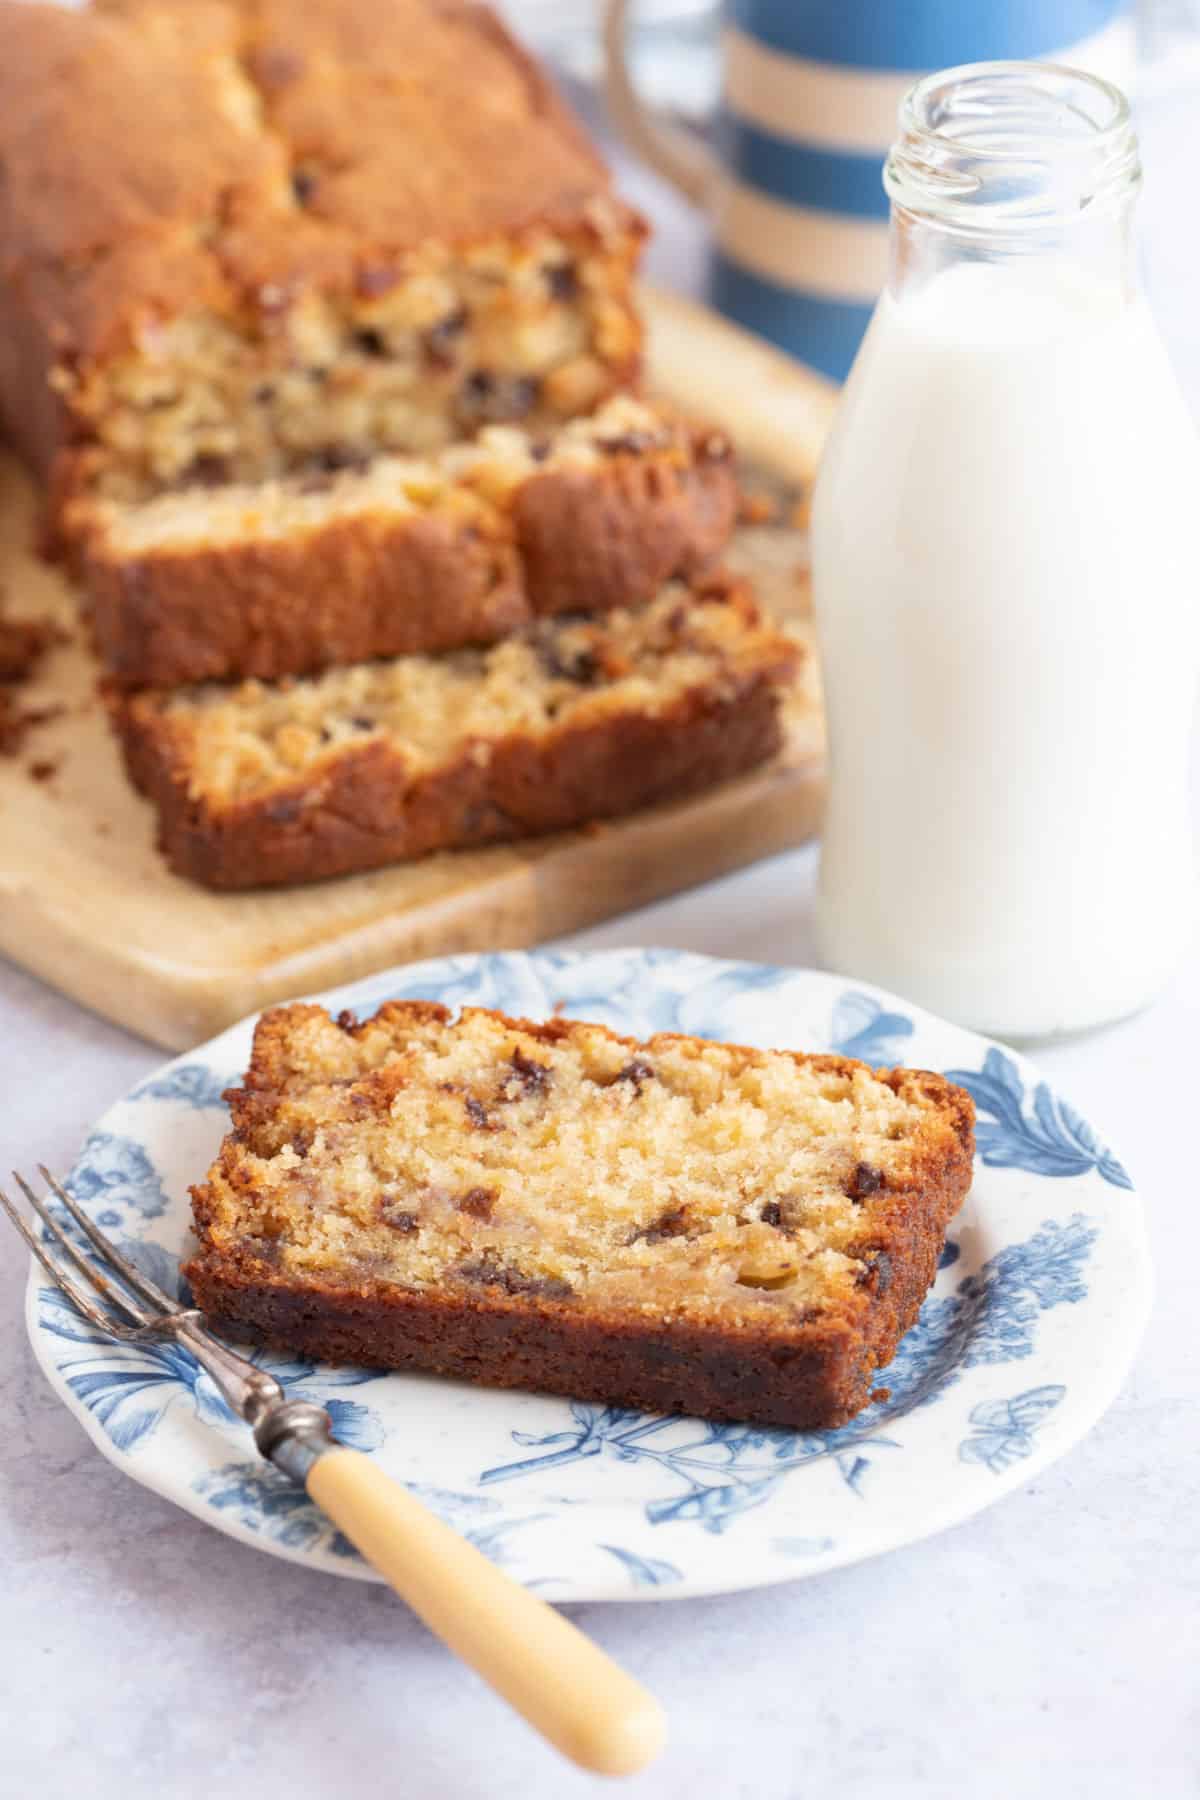 A slice of moist chocolate chip banana bread with a glass of milk.